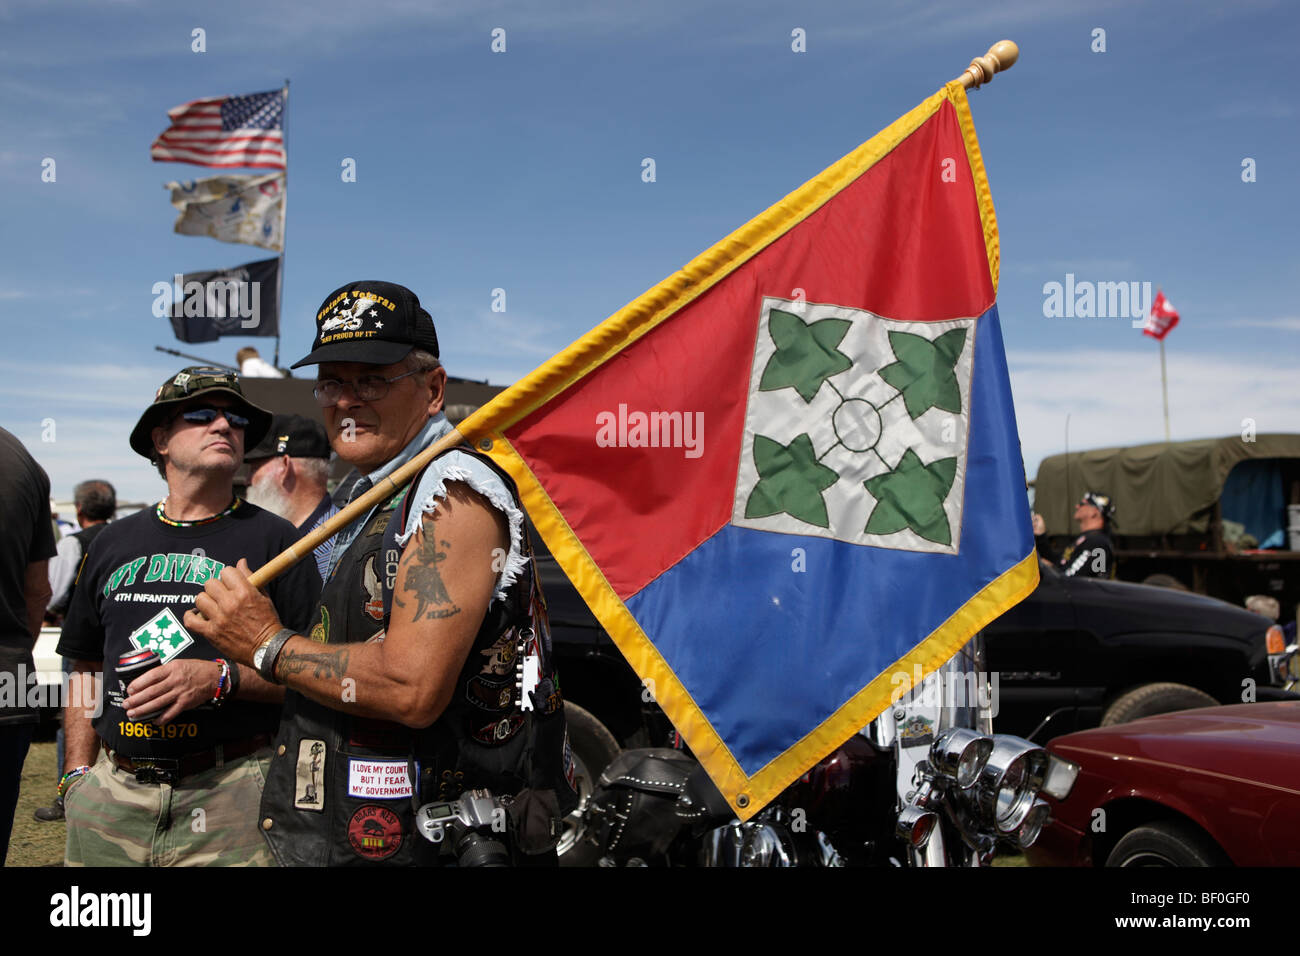 Veterans of the 4th Infantry Division hold the Ivy flag before a group photos during the Vietnam Veterans gathering in Kokomo. Stock Photo